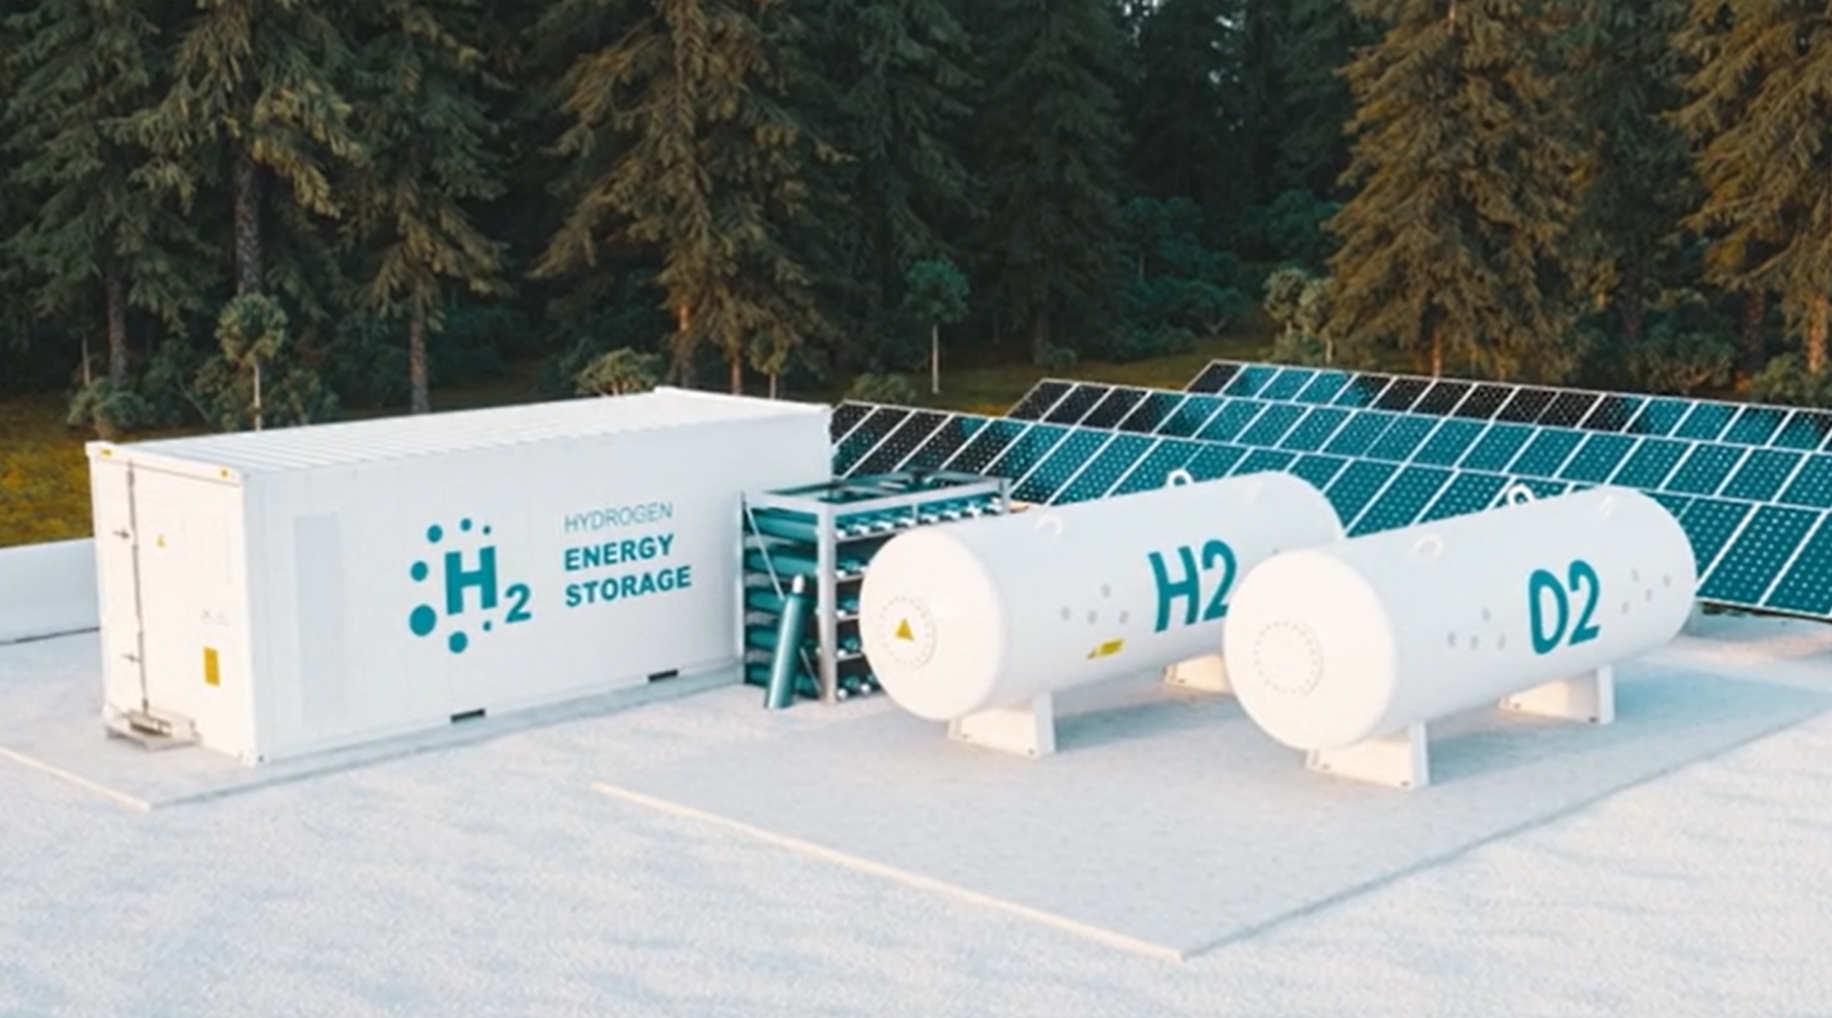 Energy storage and Hydrogen storage facility amongst green trees